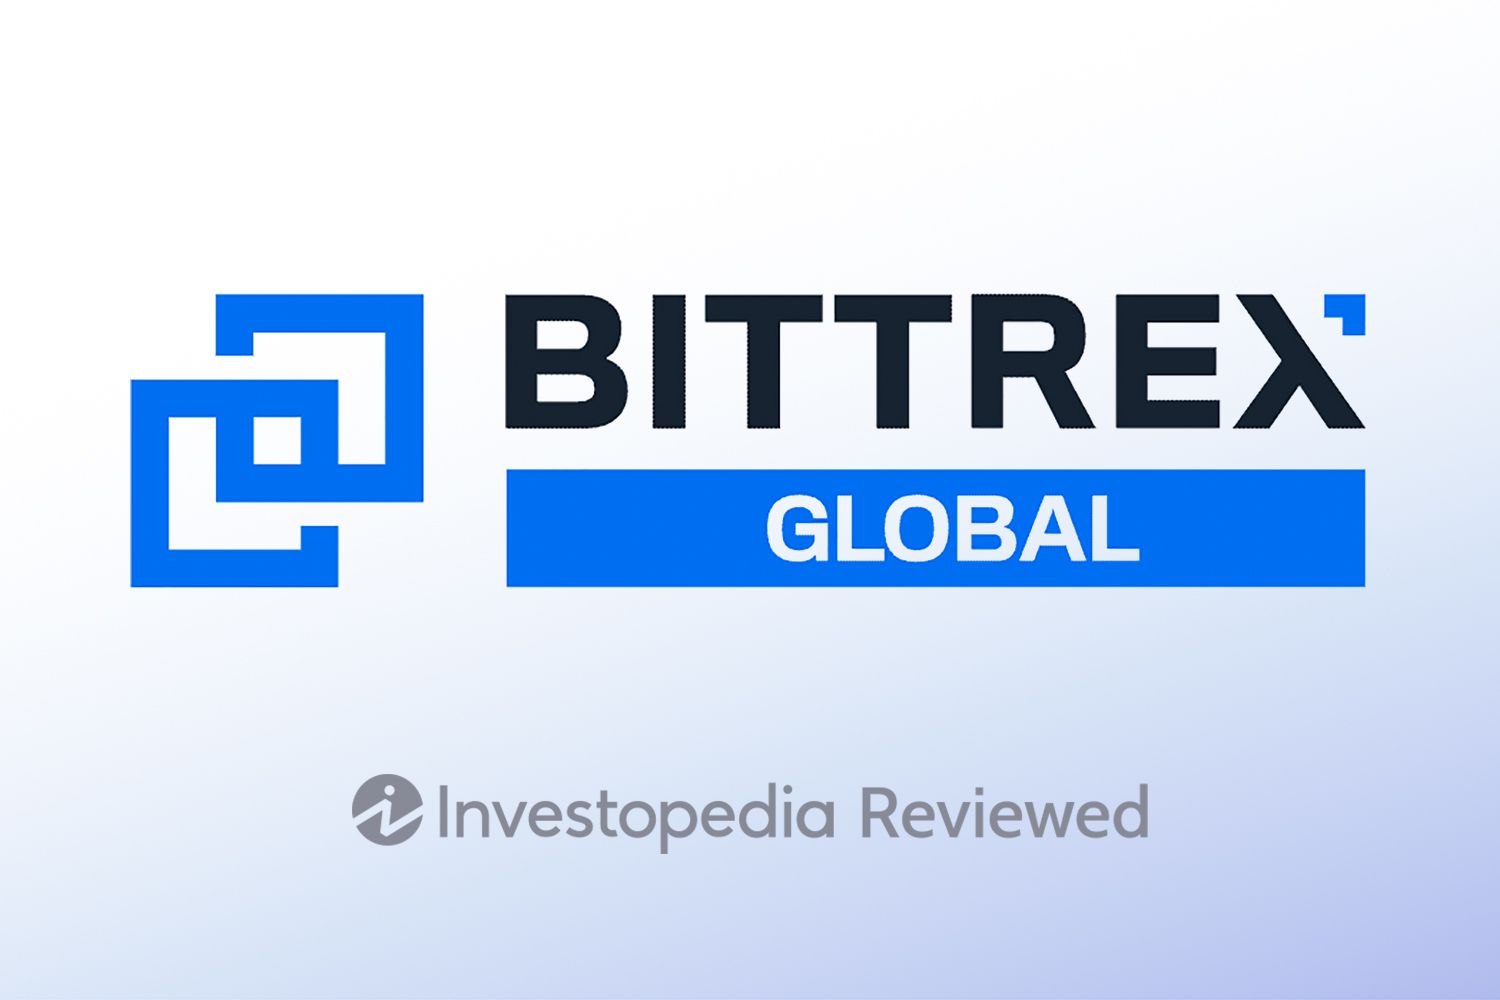 Bittrex Global rolls out its credit and debit card service to more countries - FinTech Global